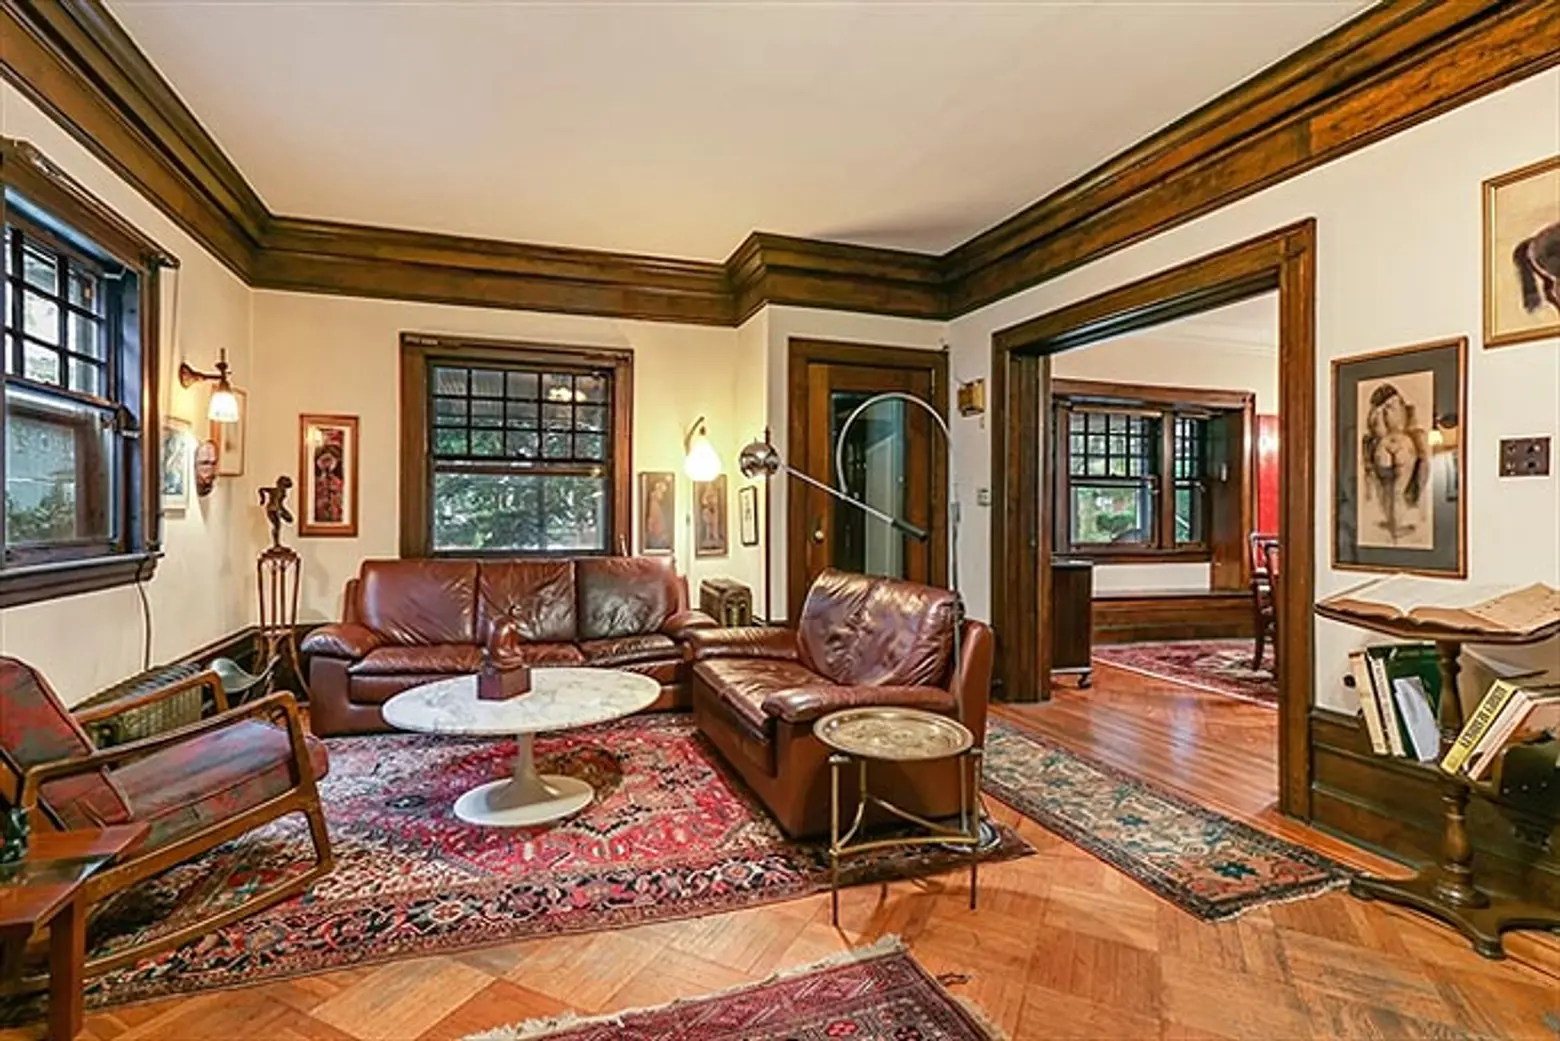 Ditmas Park Craftsman, Fisk Terrace-Midwood Park Historic District, real estate brooklyn, real estate ditmas park,